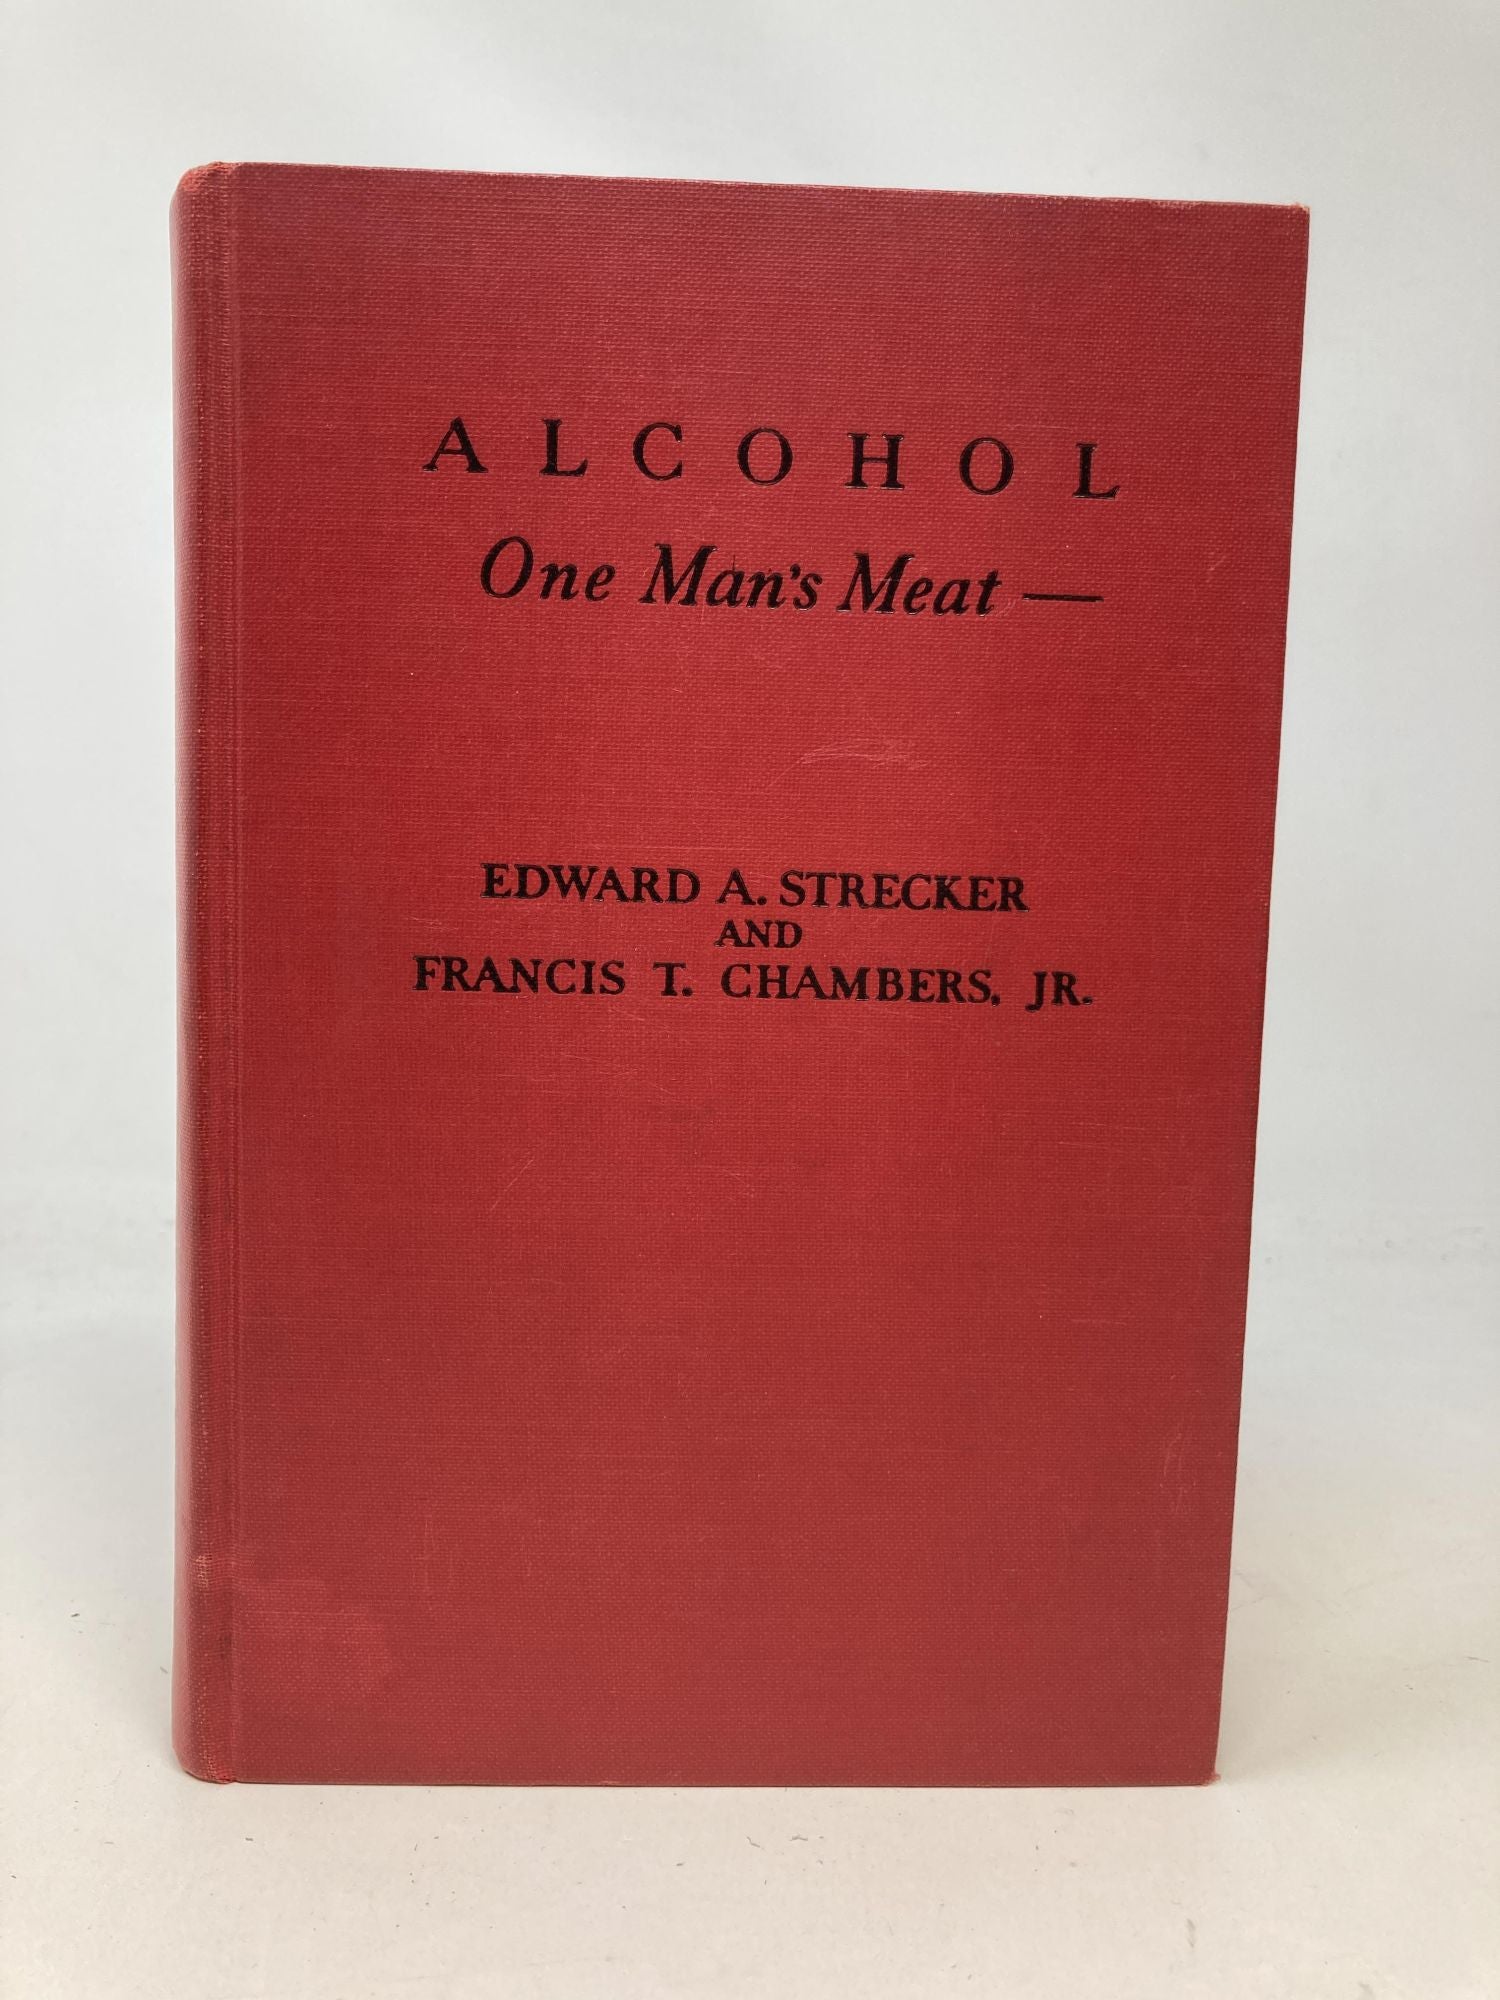 Strecker, Edward A. and Francis T. Chambers - Alcohol: One Man's Meat